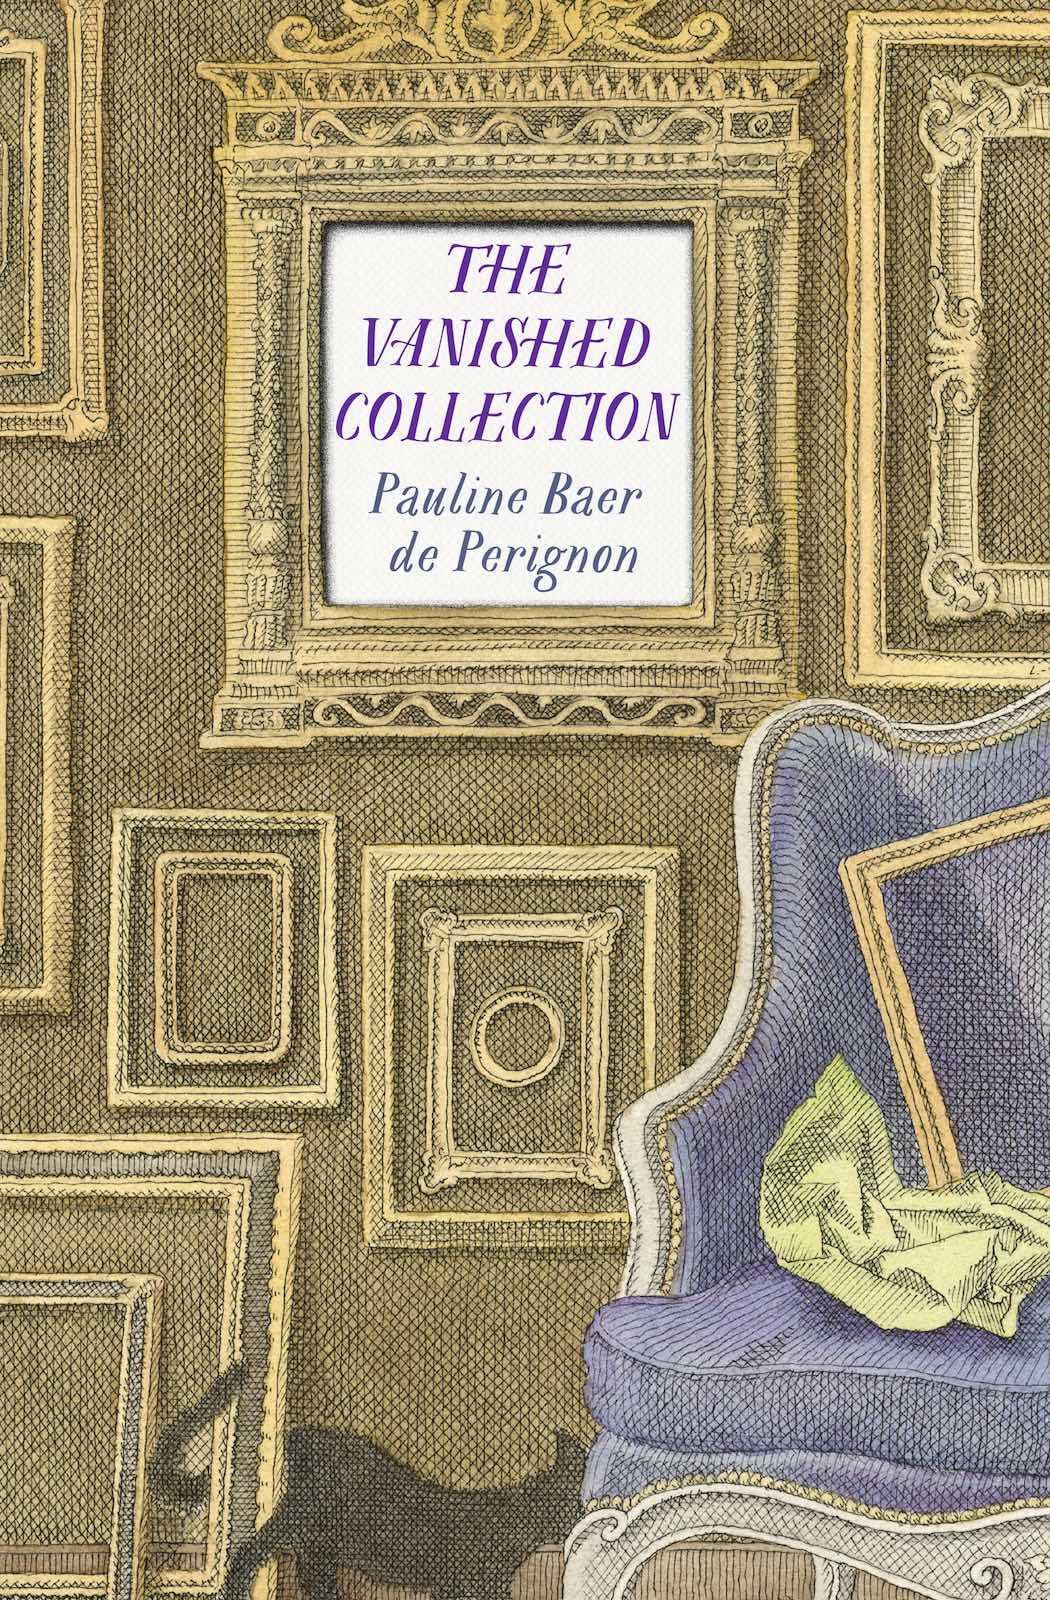 Cover of The Vanished Collection by Pauline Baer de Perignon.